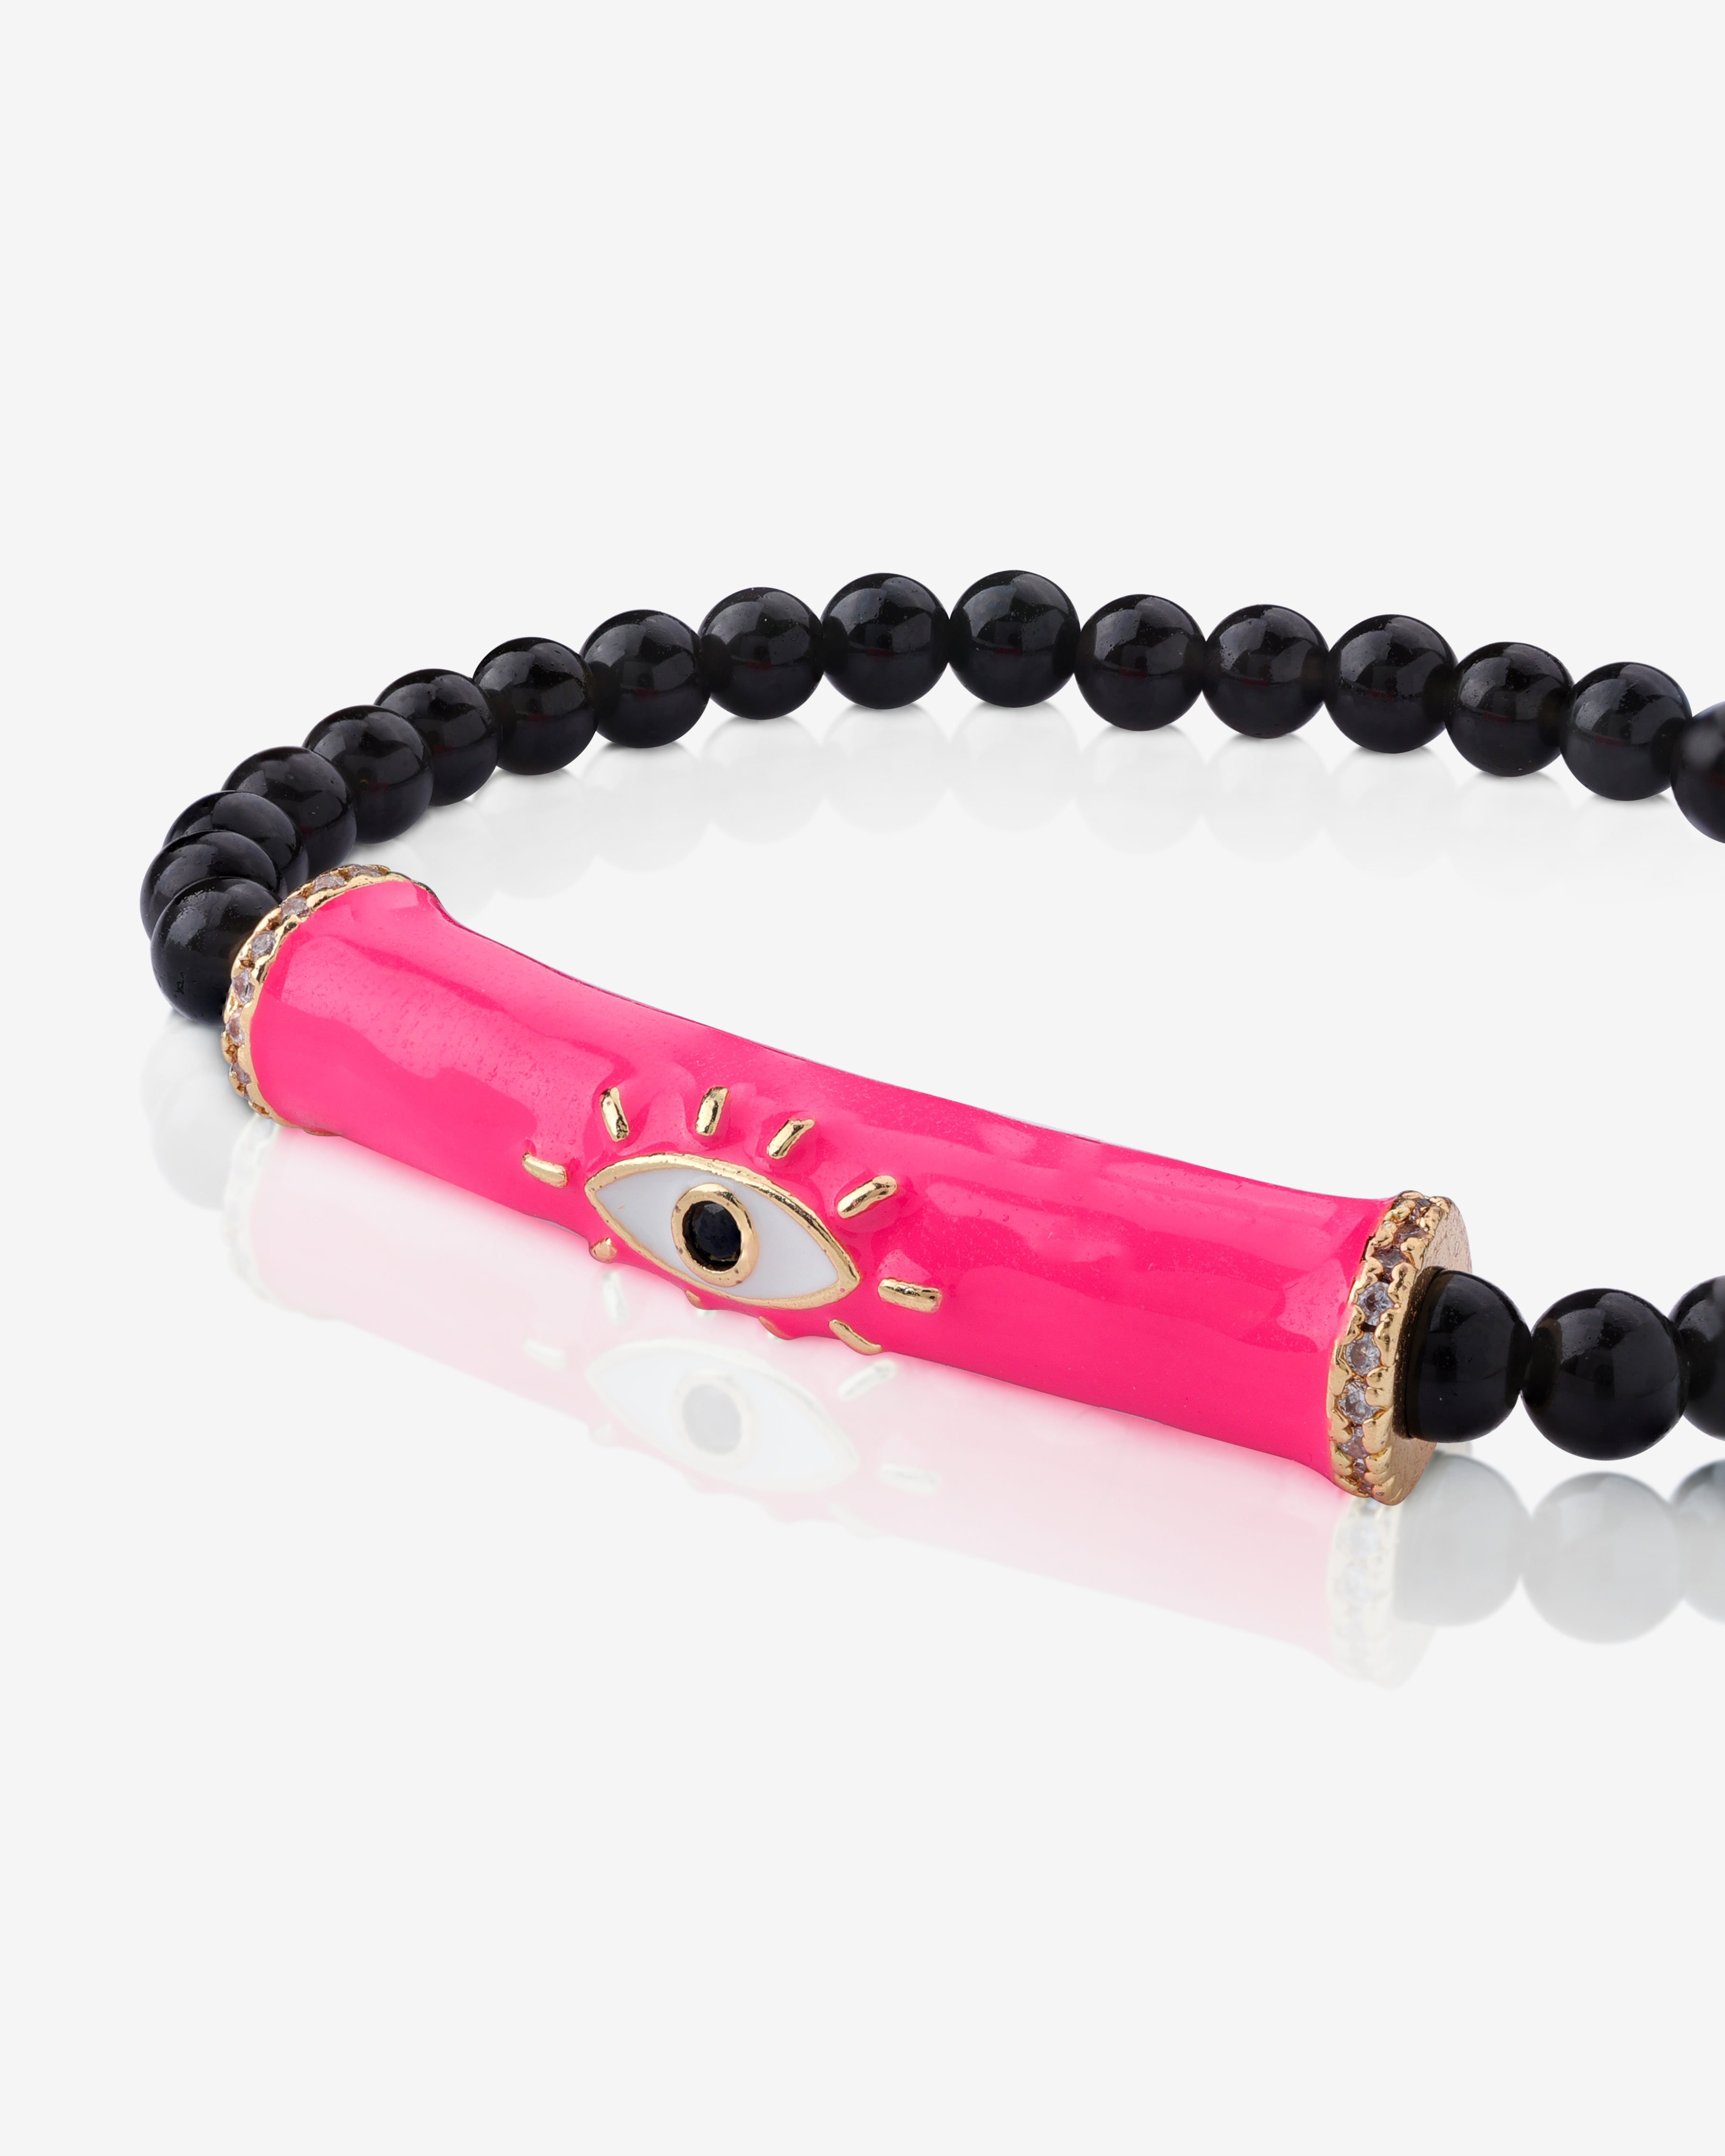 PINK COLLECTION - Hot Pink Synthesis 10mm Bead Bracelet - Rose Gold Wo